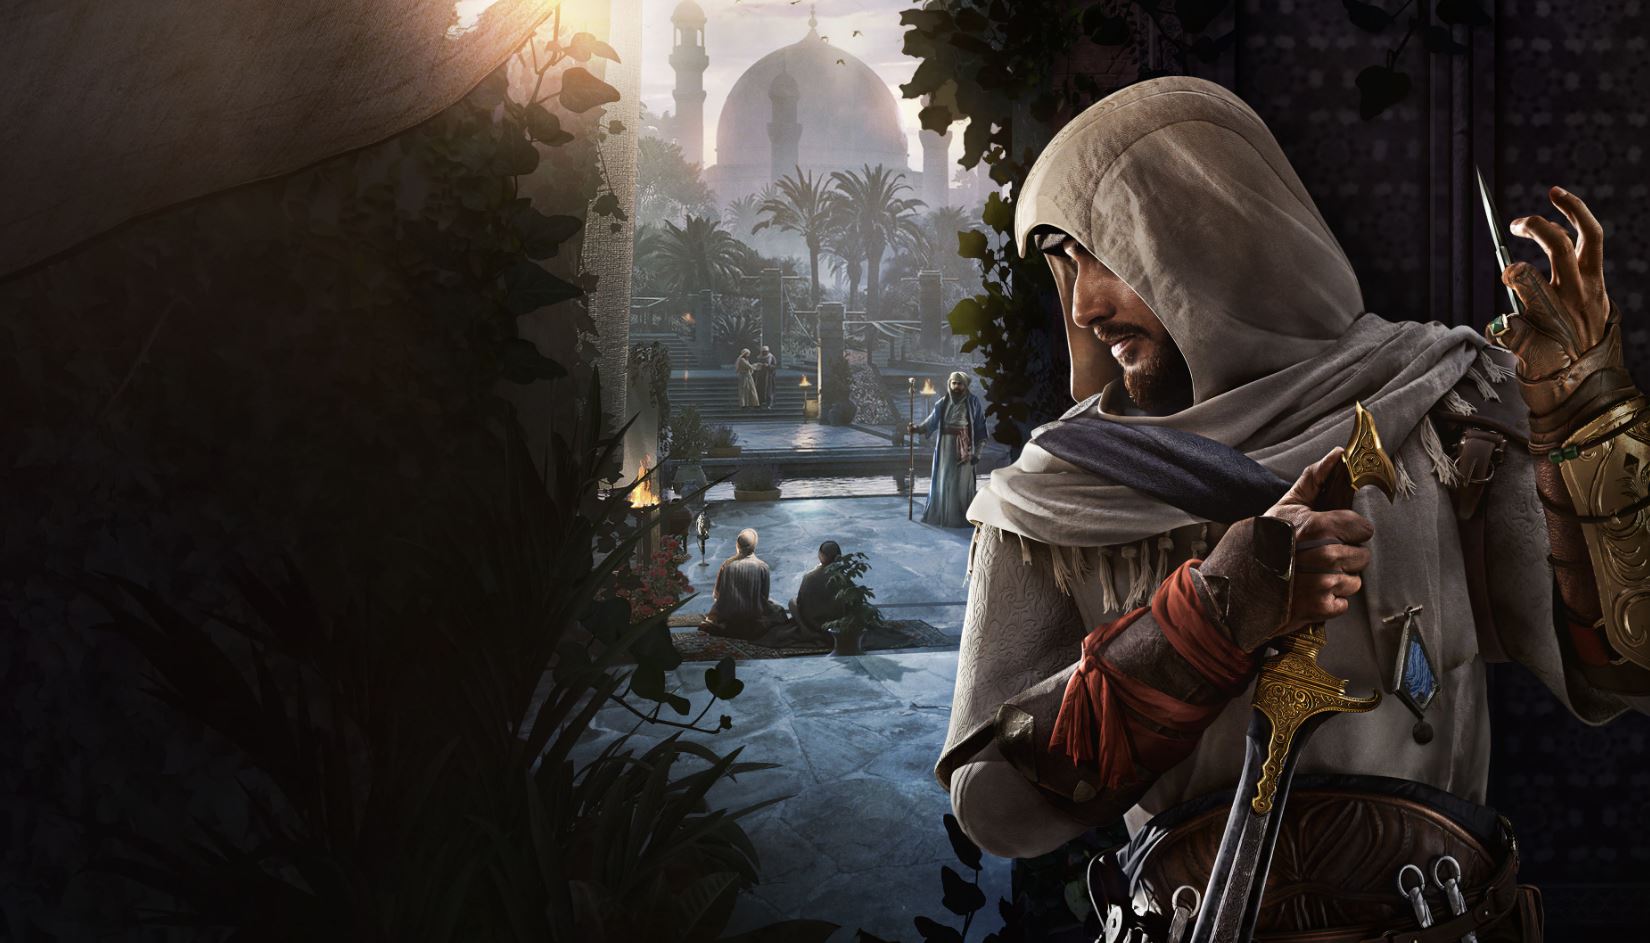 Assassin's Creed: Valhalla Has Features You've Never Seen Before